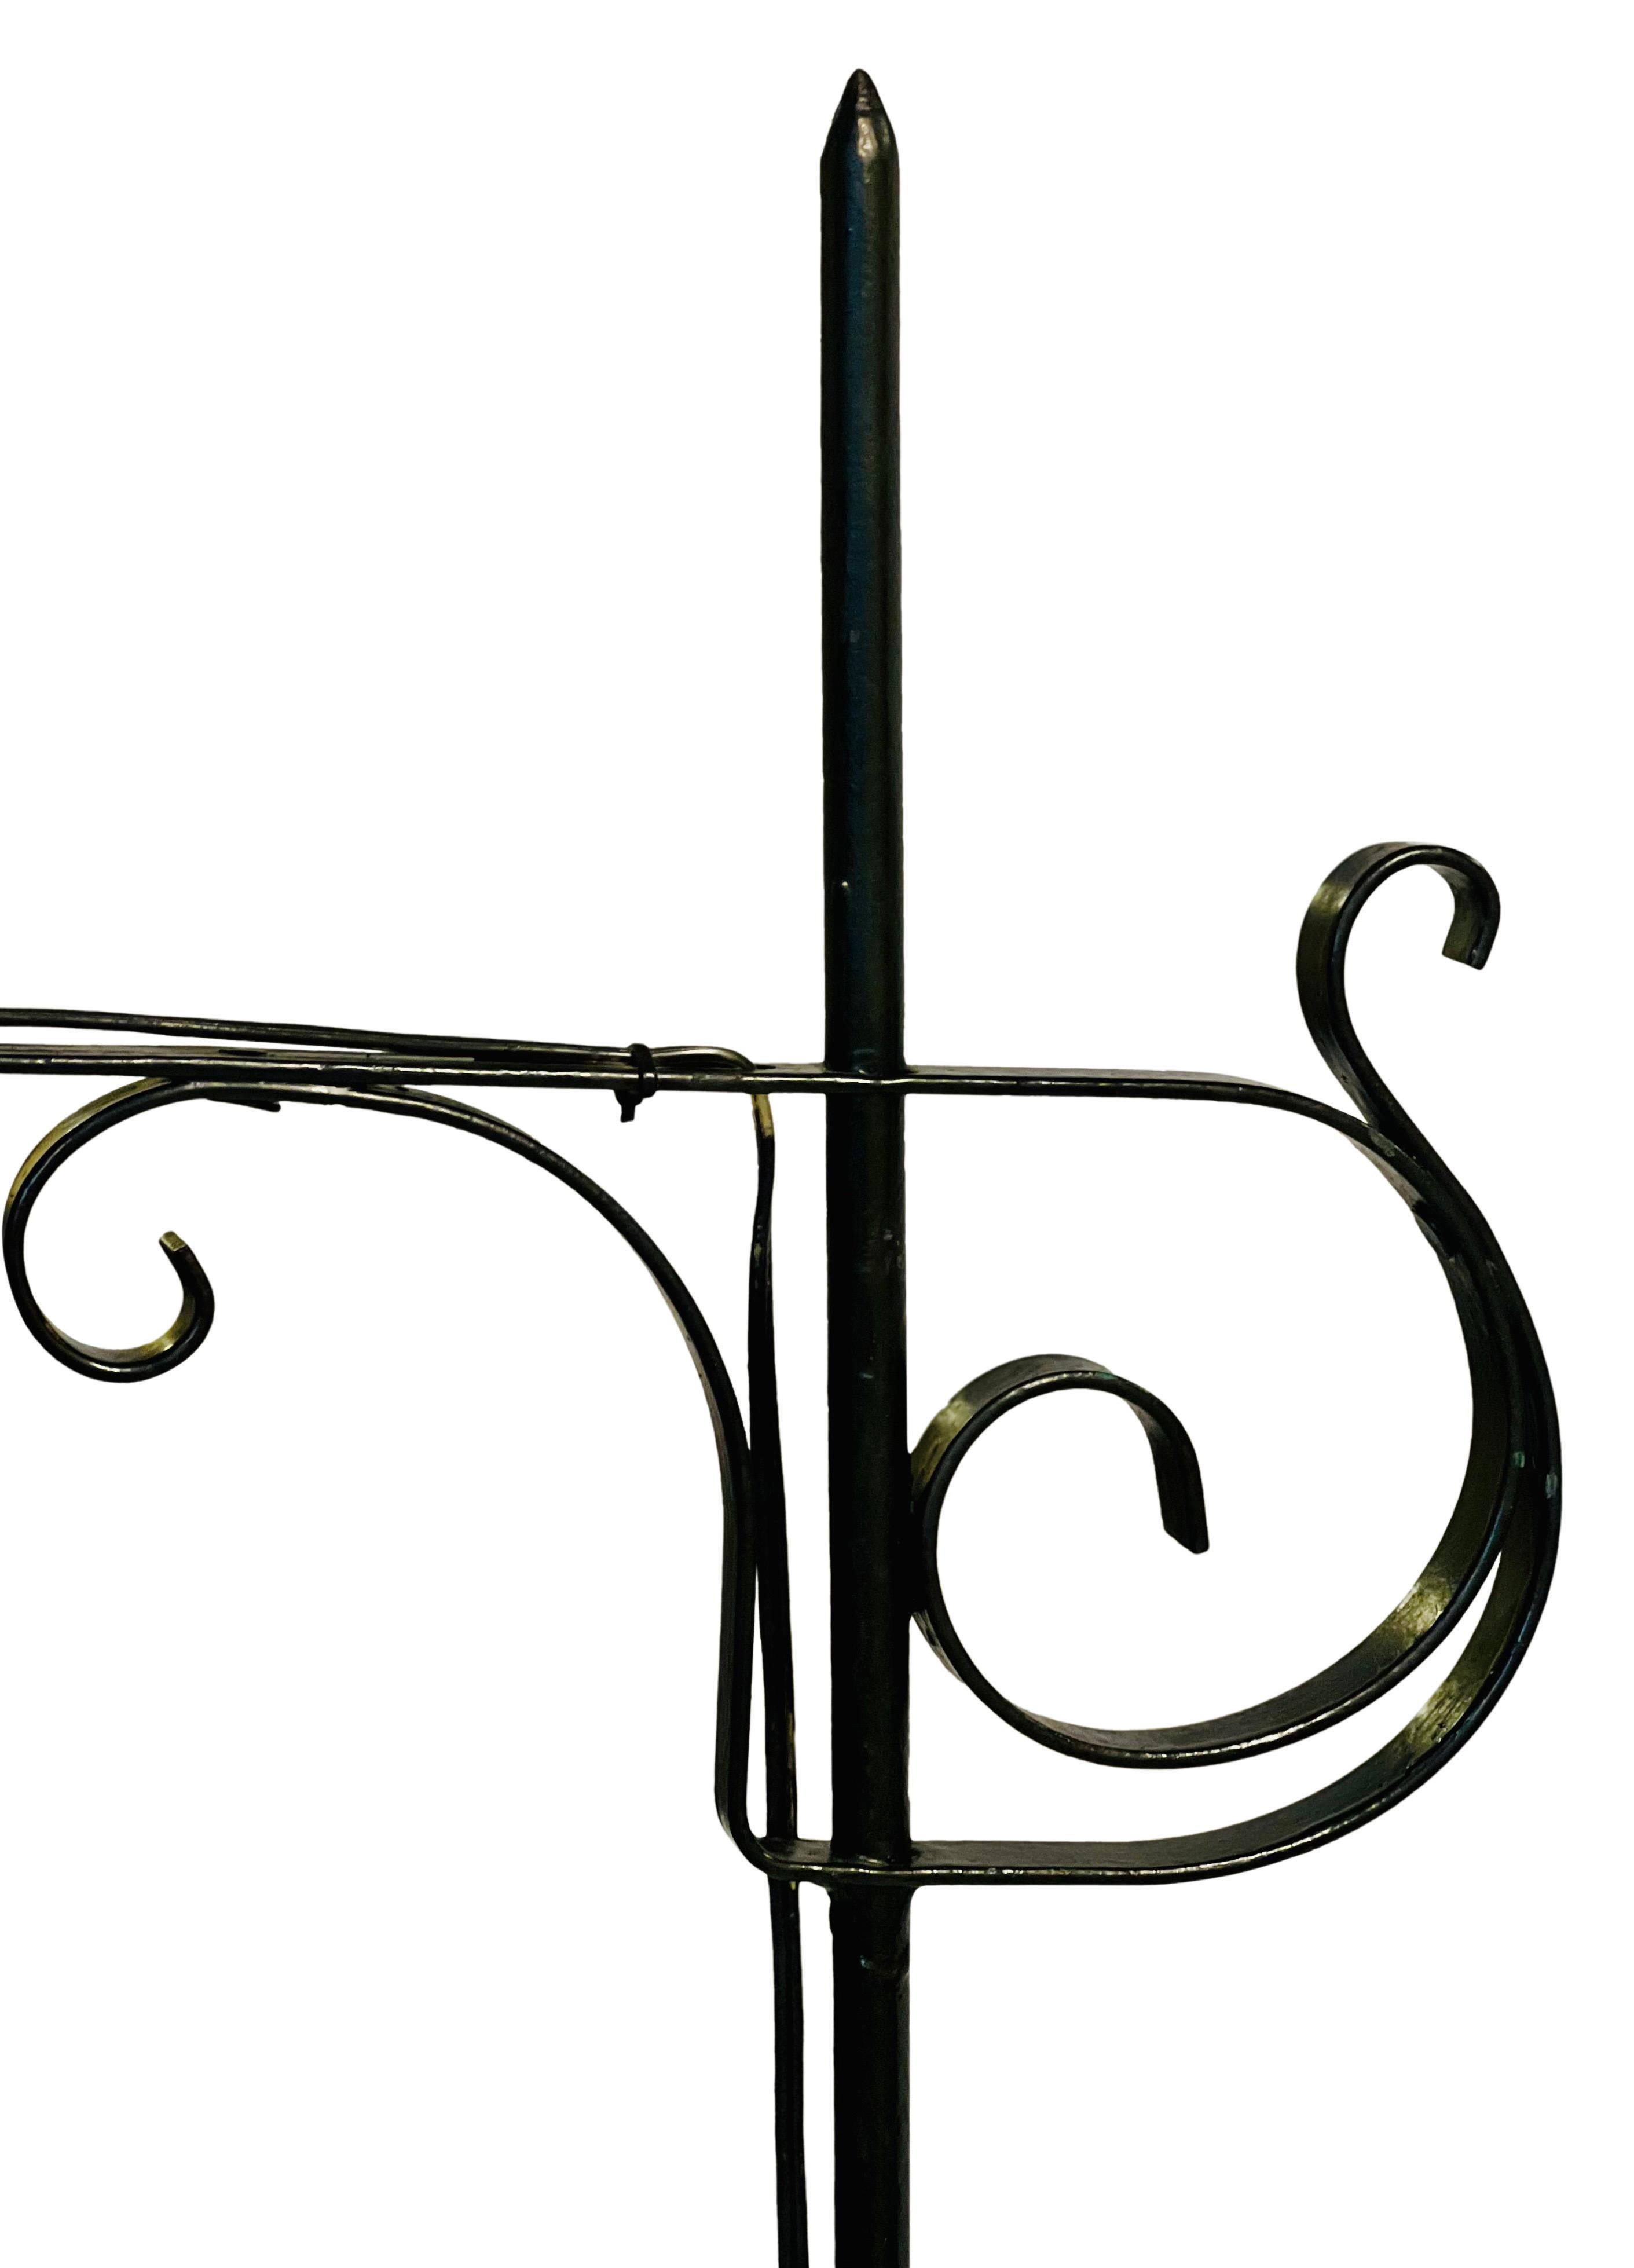 Antique Handcrafted Wrought Iron Floor Lamp with Metal Shade, circa 1910 For Sale 2